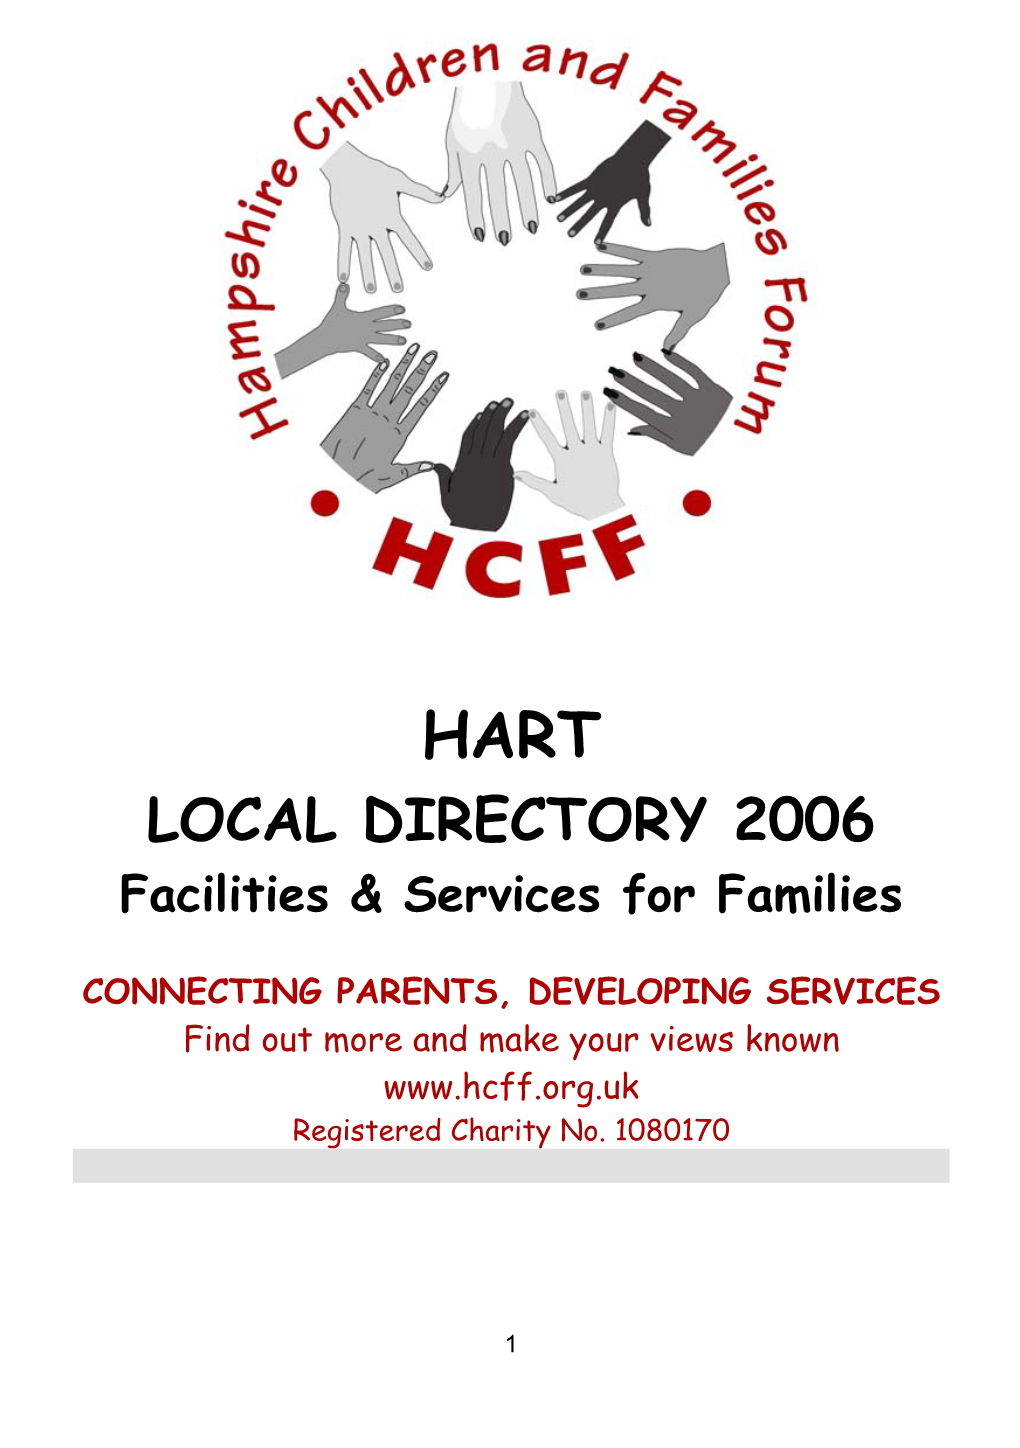 LOCAL DIRECTORY 2006 Facilities & Services for Families